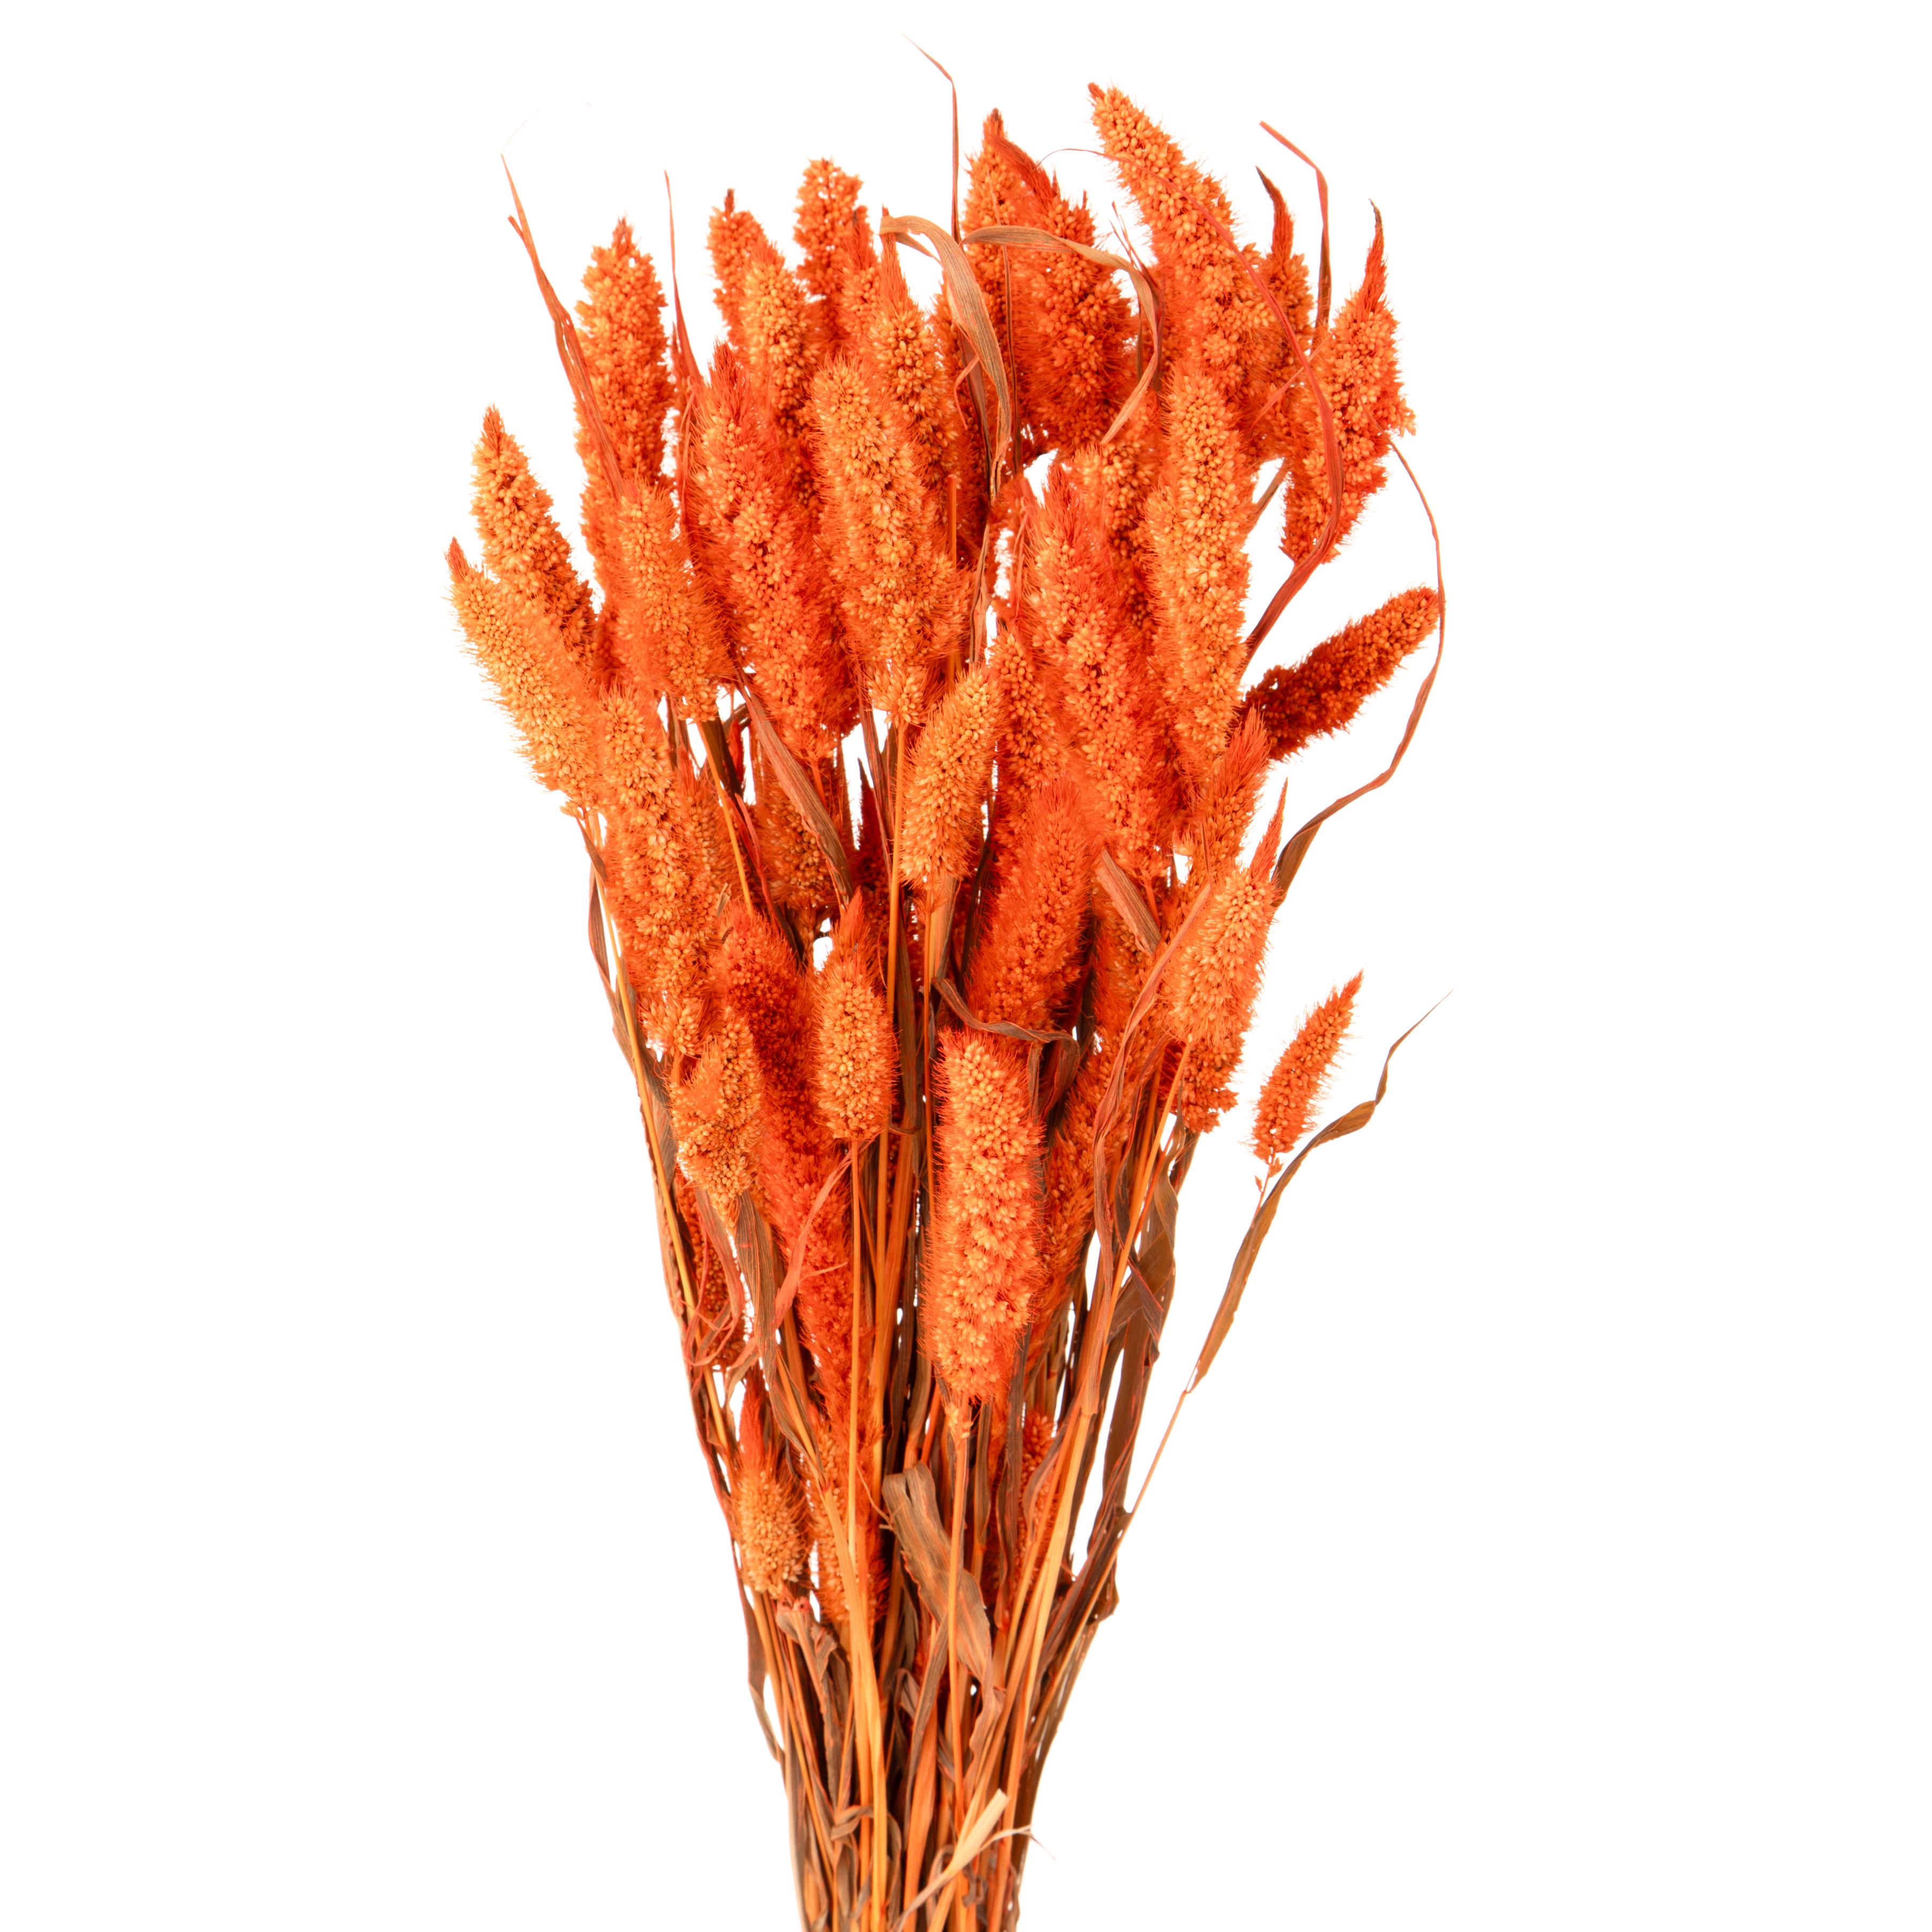 NATURAL PRODUCTS DRIED FLOWERS AND ERBS,SETARIA GR SBIAN/COL A KG